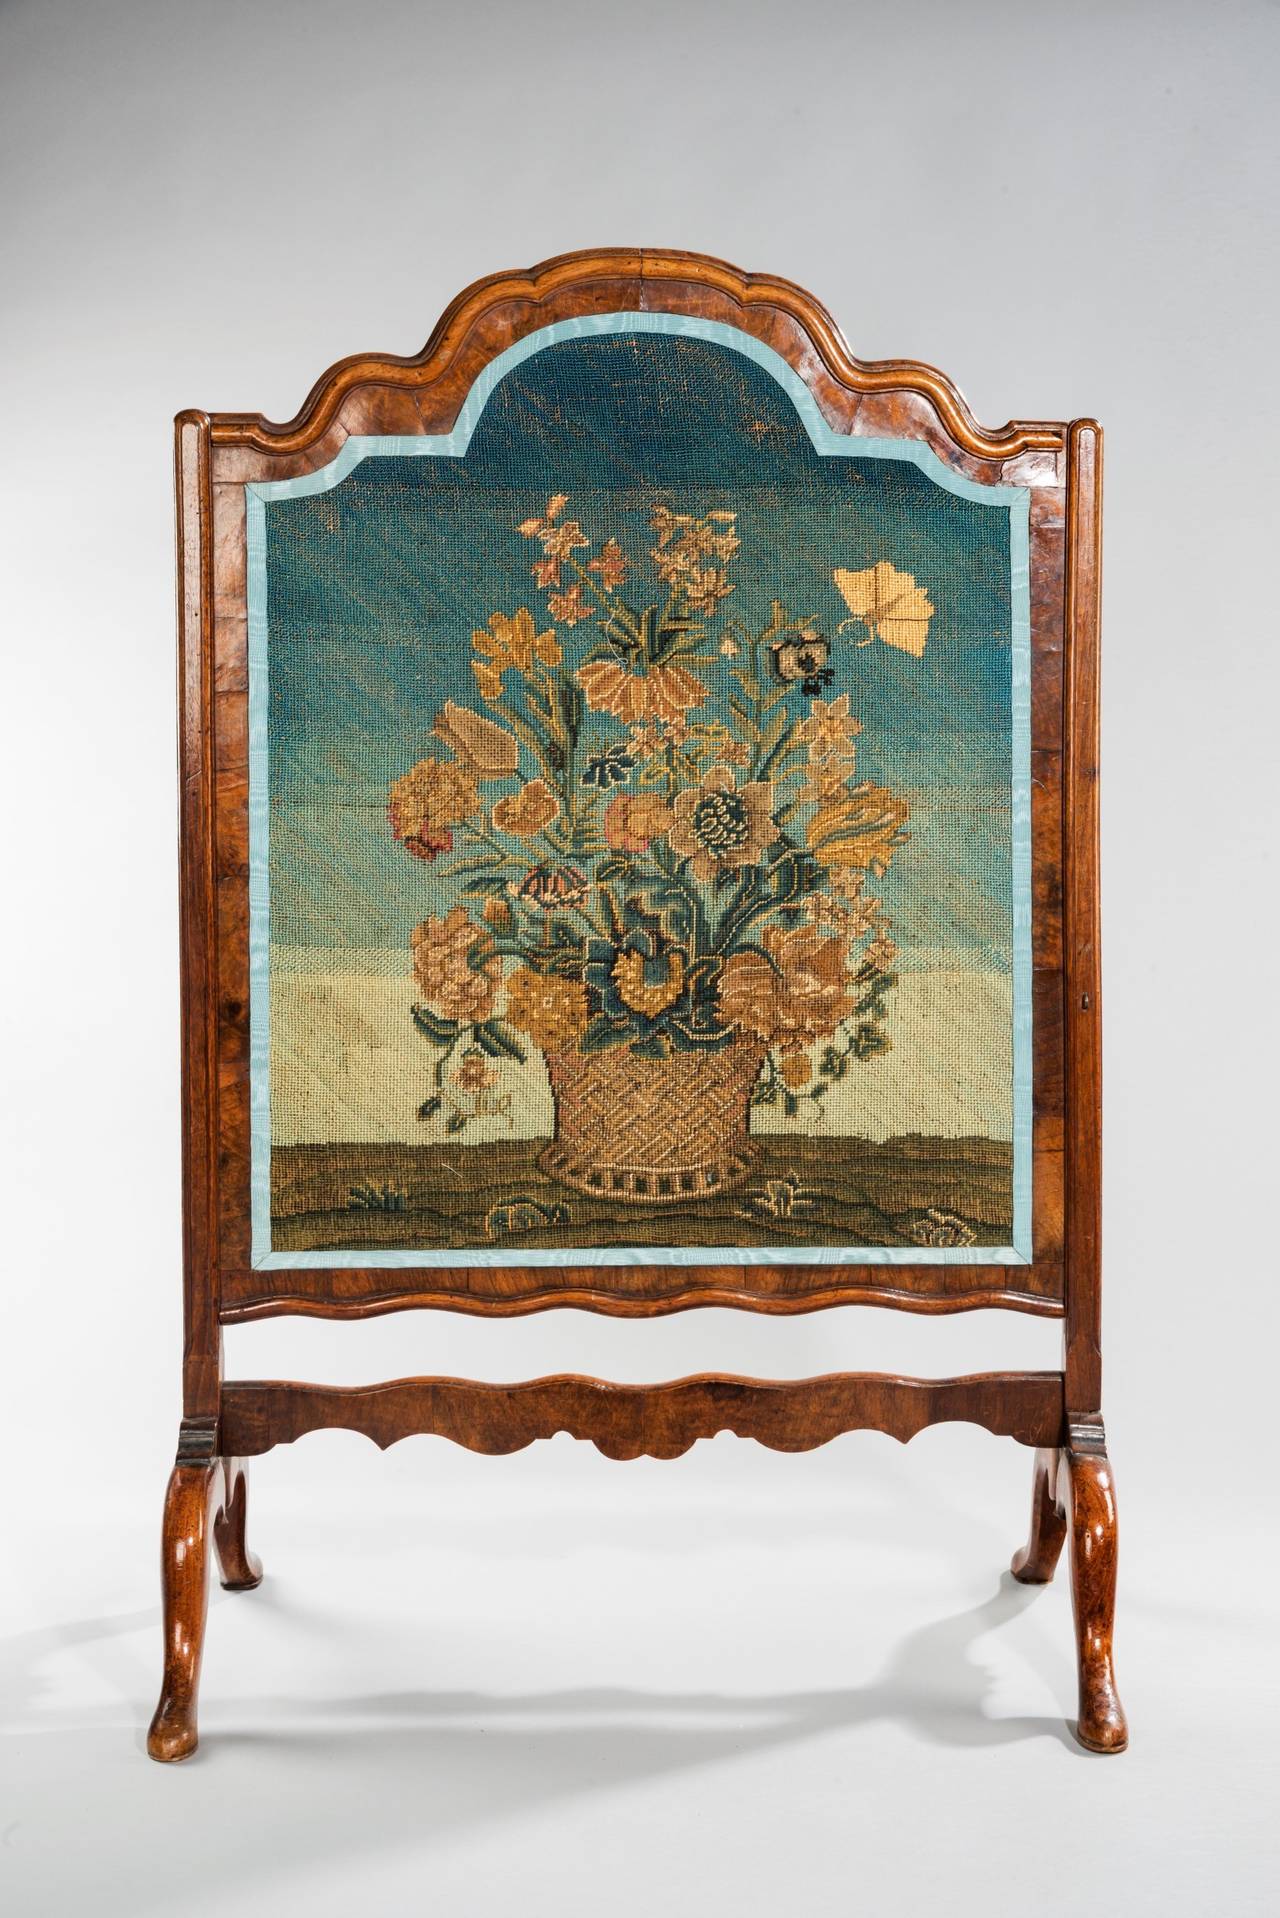 A beautiful needlework panel of flowers in a large urn or basket woven container and a large oversized butterfly in flight. The whole is housed in an 18th early 19th century walnut end support fire screen frame, which slides up and down and has